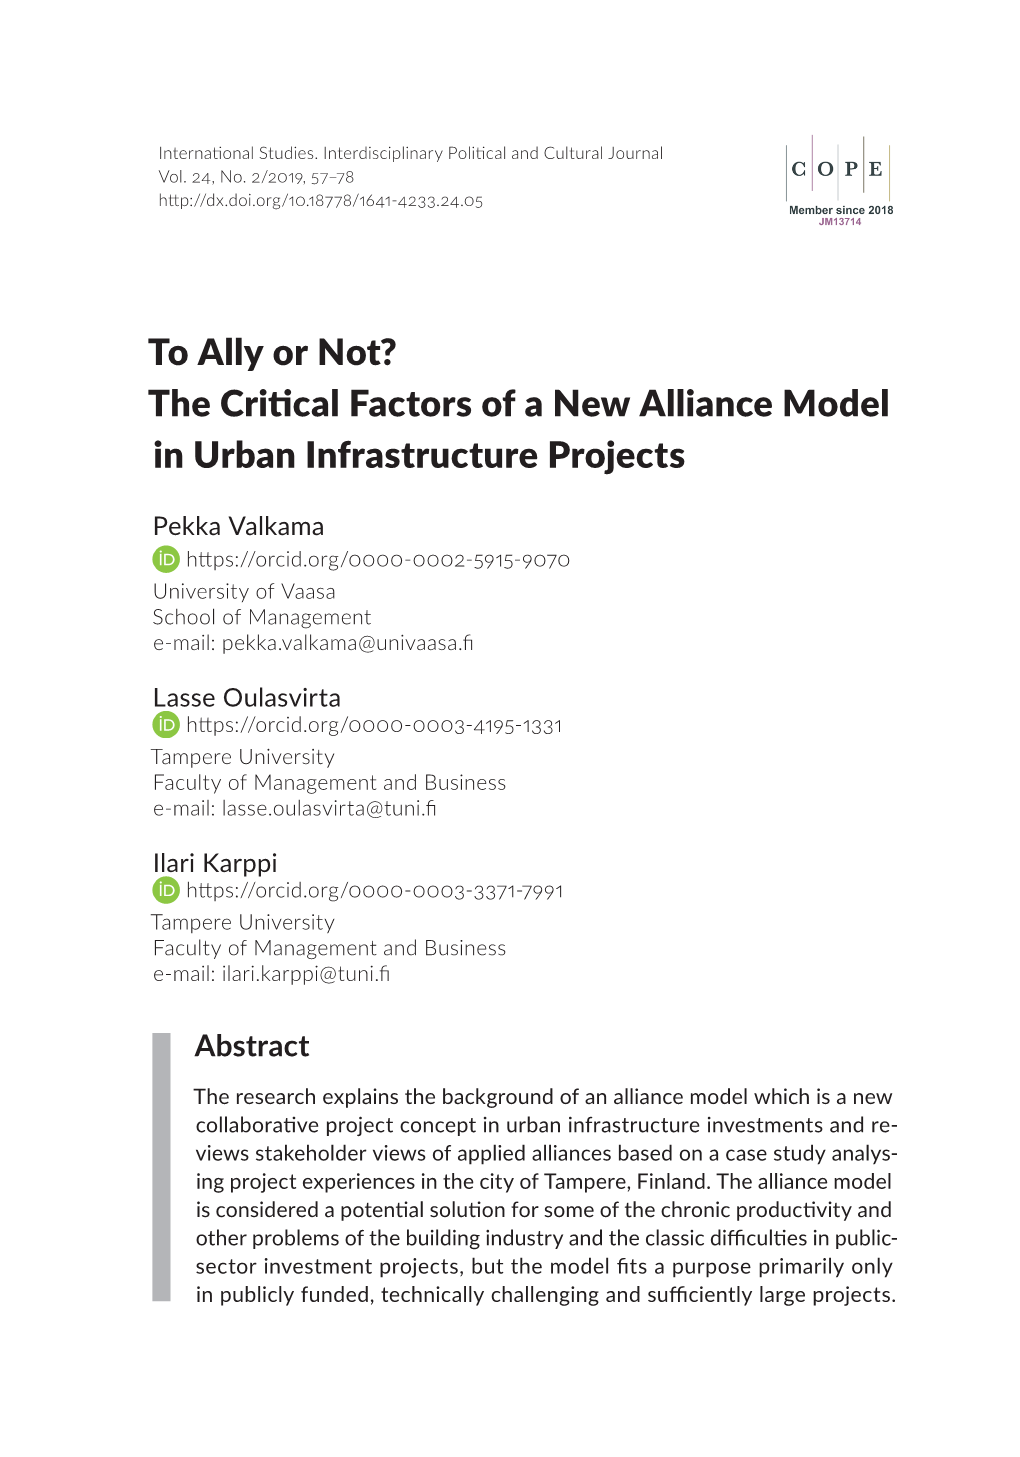 To Ally Or Not? the Critical Factors of a New Alliance Model in Urban Infrastructure Projects